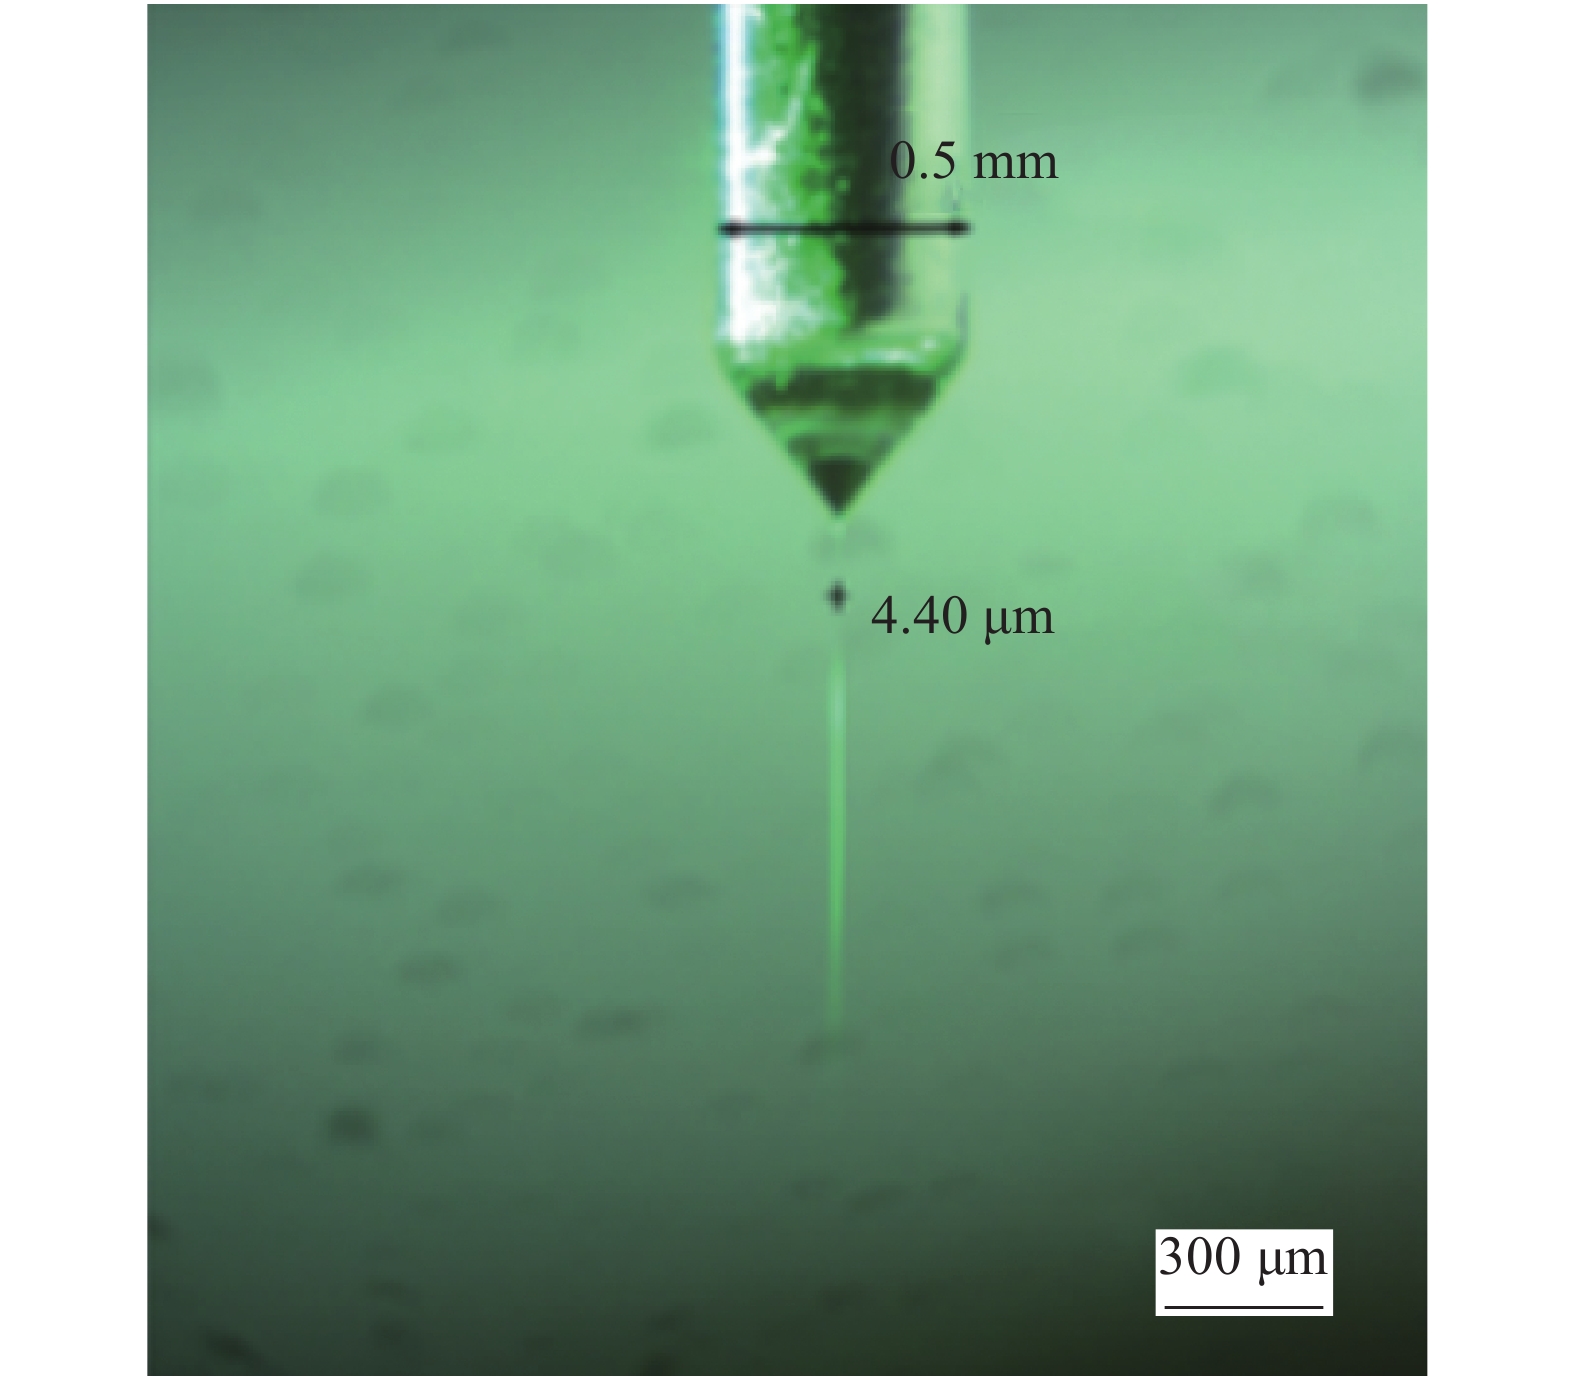 Picture of a nozzle with an internal diameter of 500 μm producing a jet with the diameter of 4.4 μm (Scale bar is 300 μm)